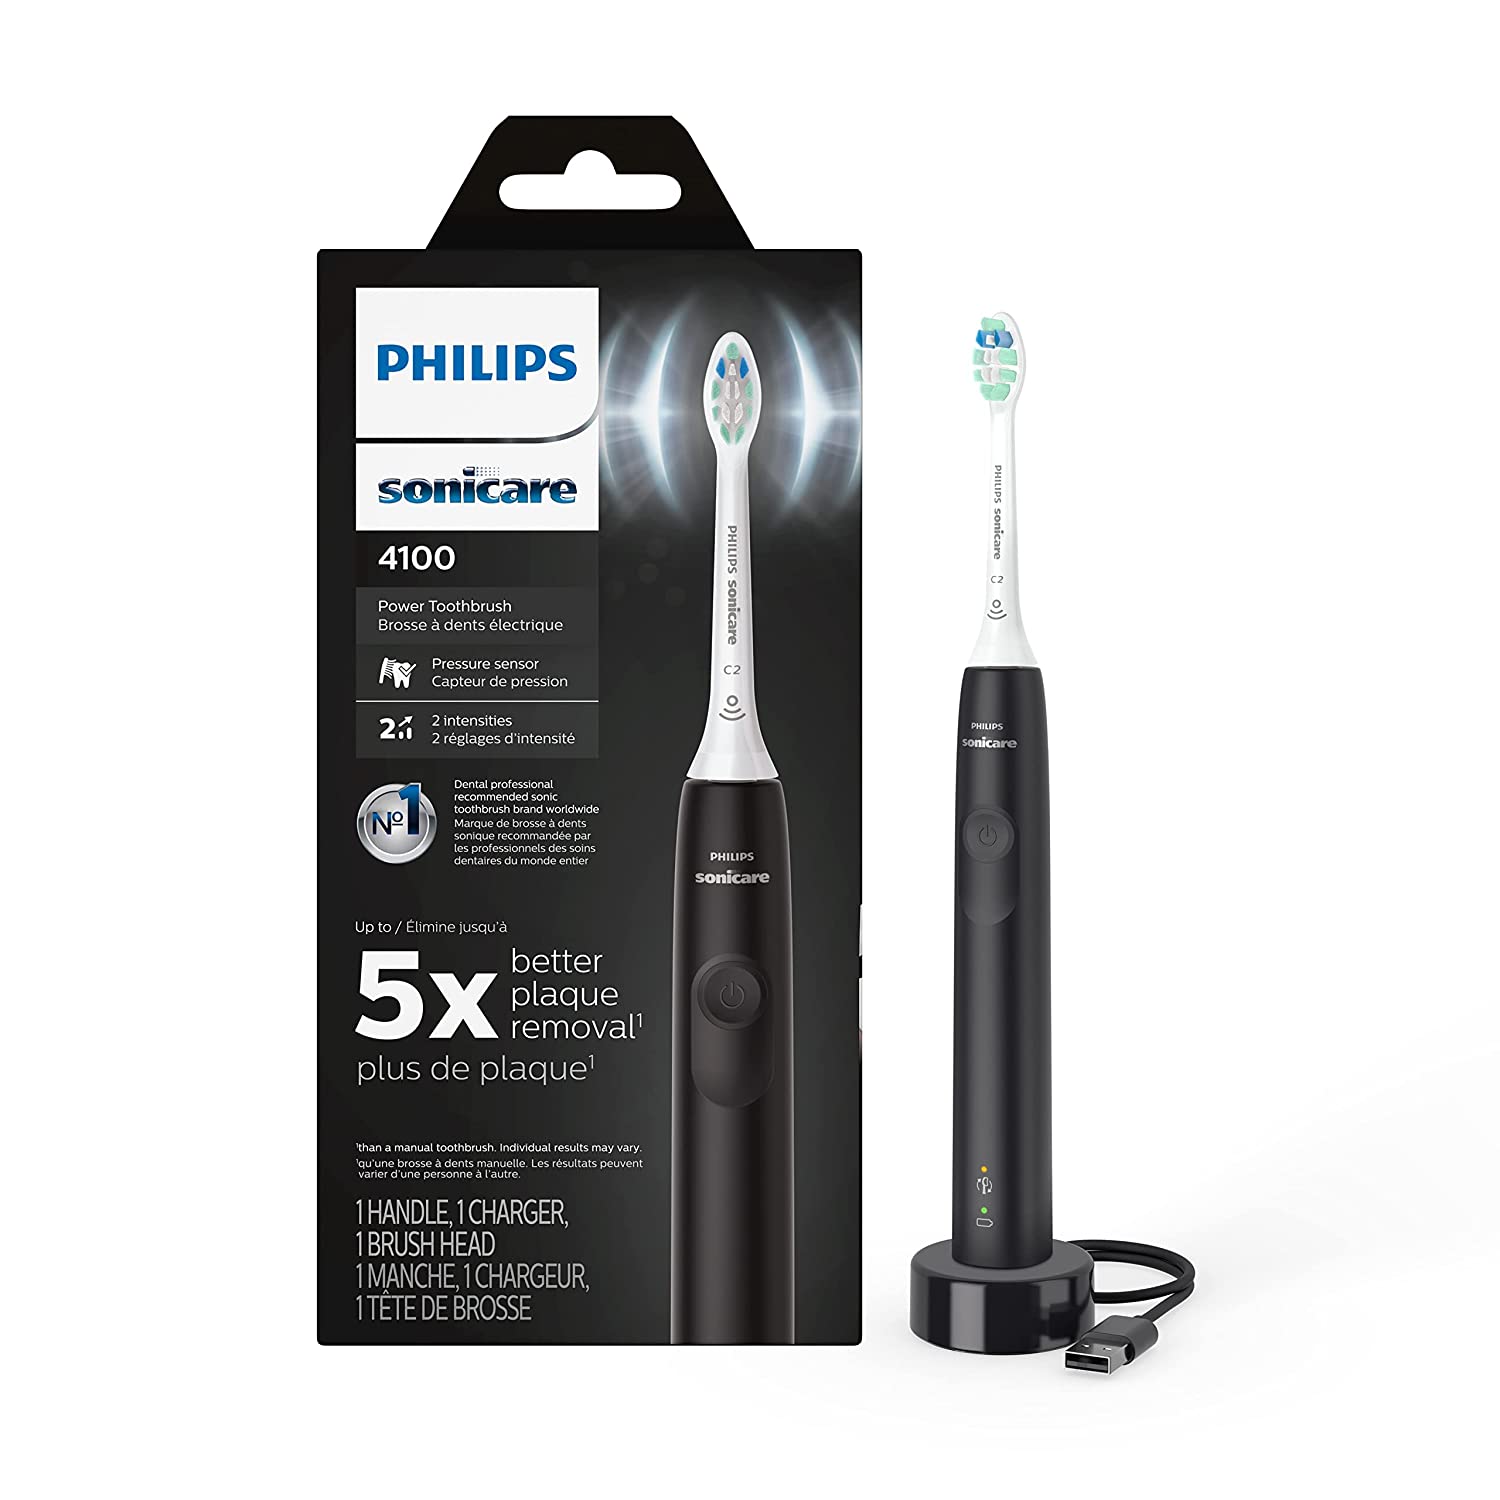 Philips Sonicare 4100 Power Toothbrush, Rechargeable Electric Toothbrush - HX3681/24